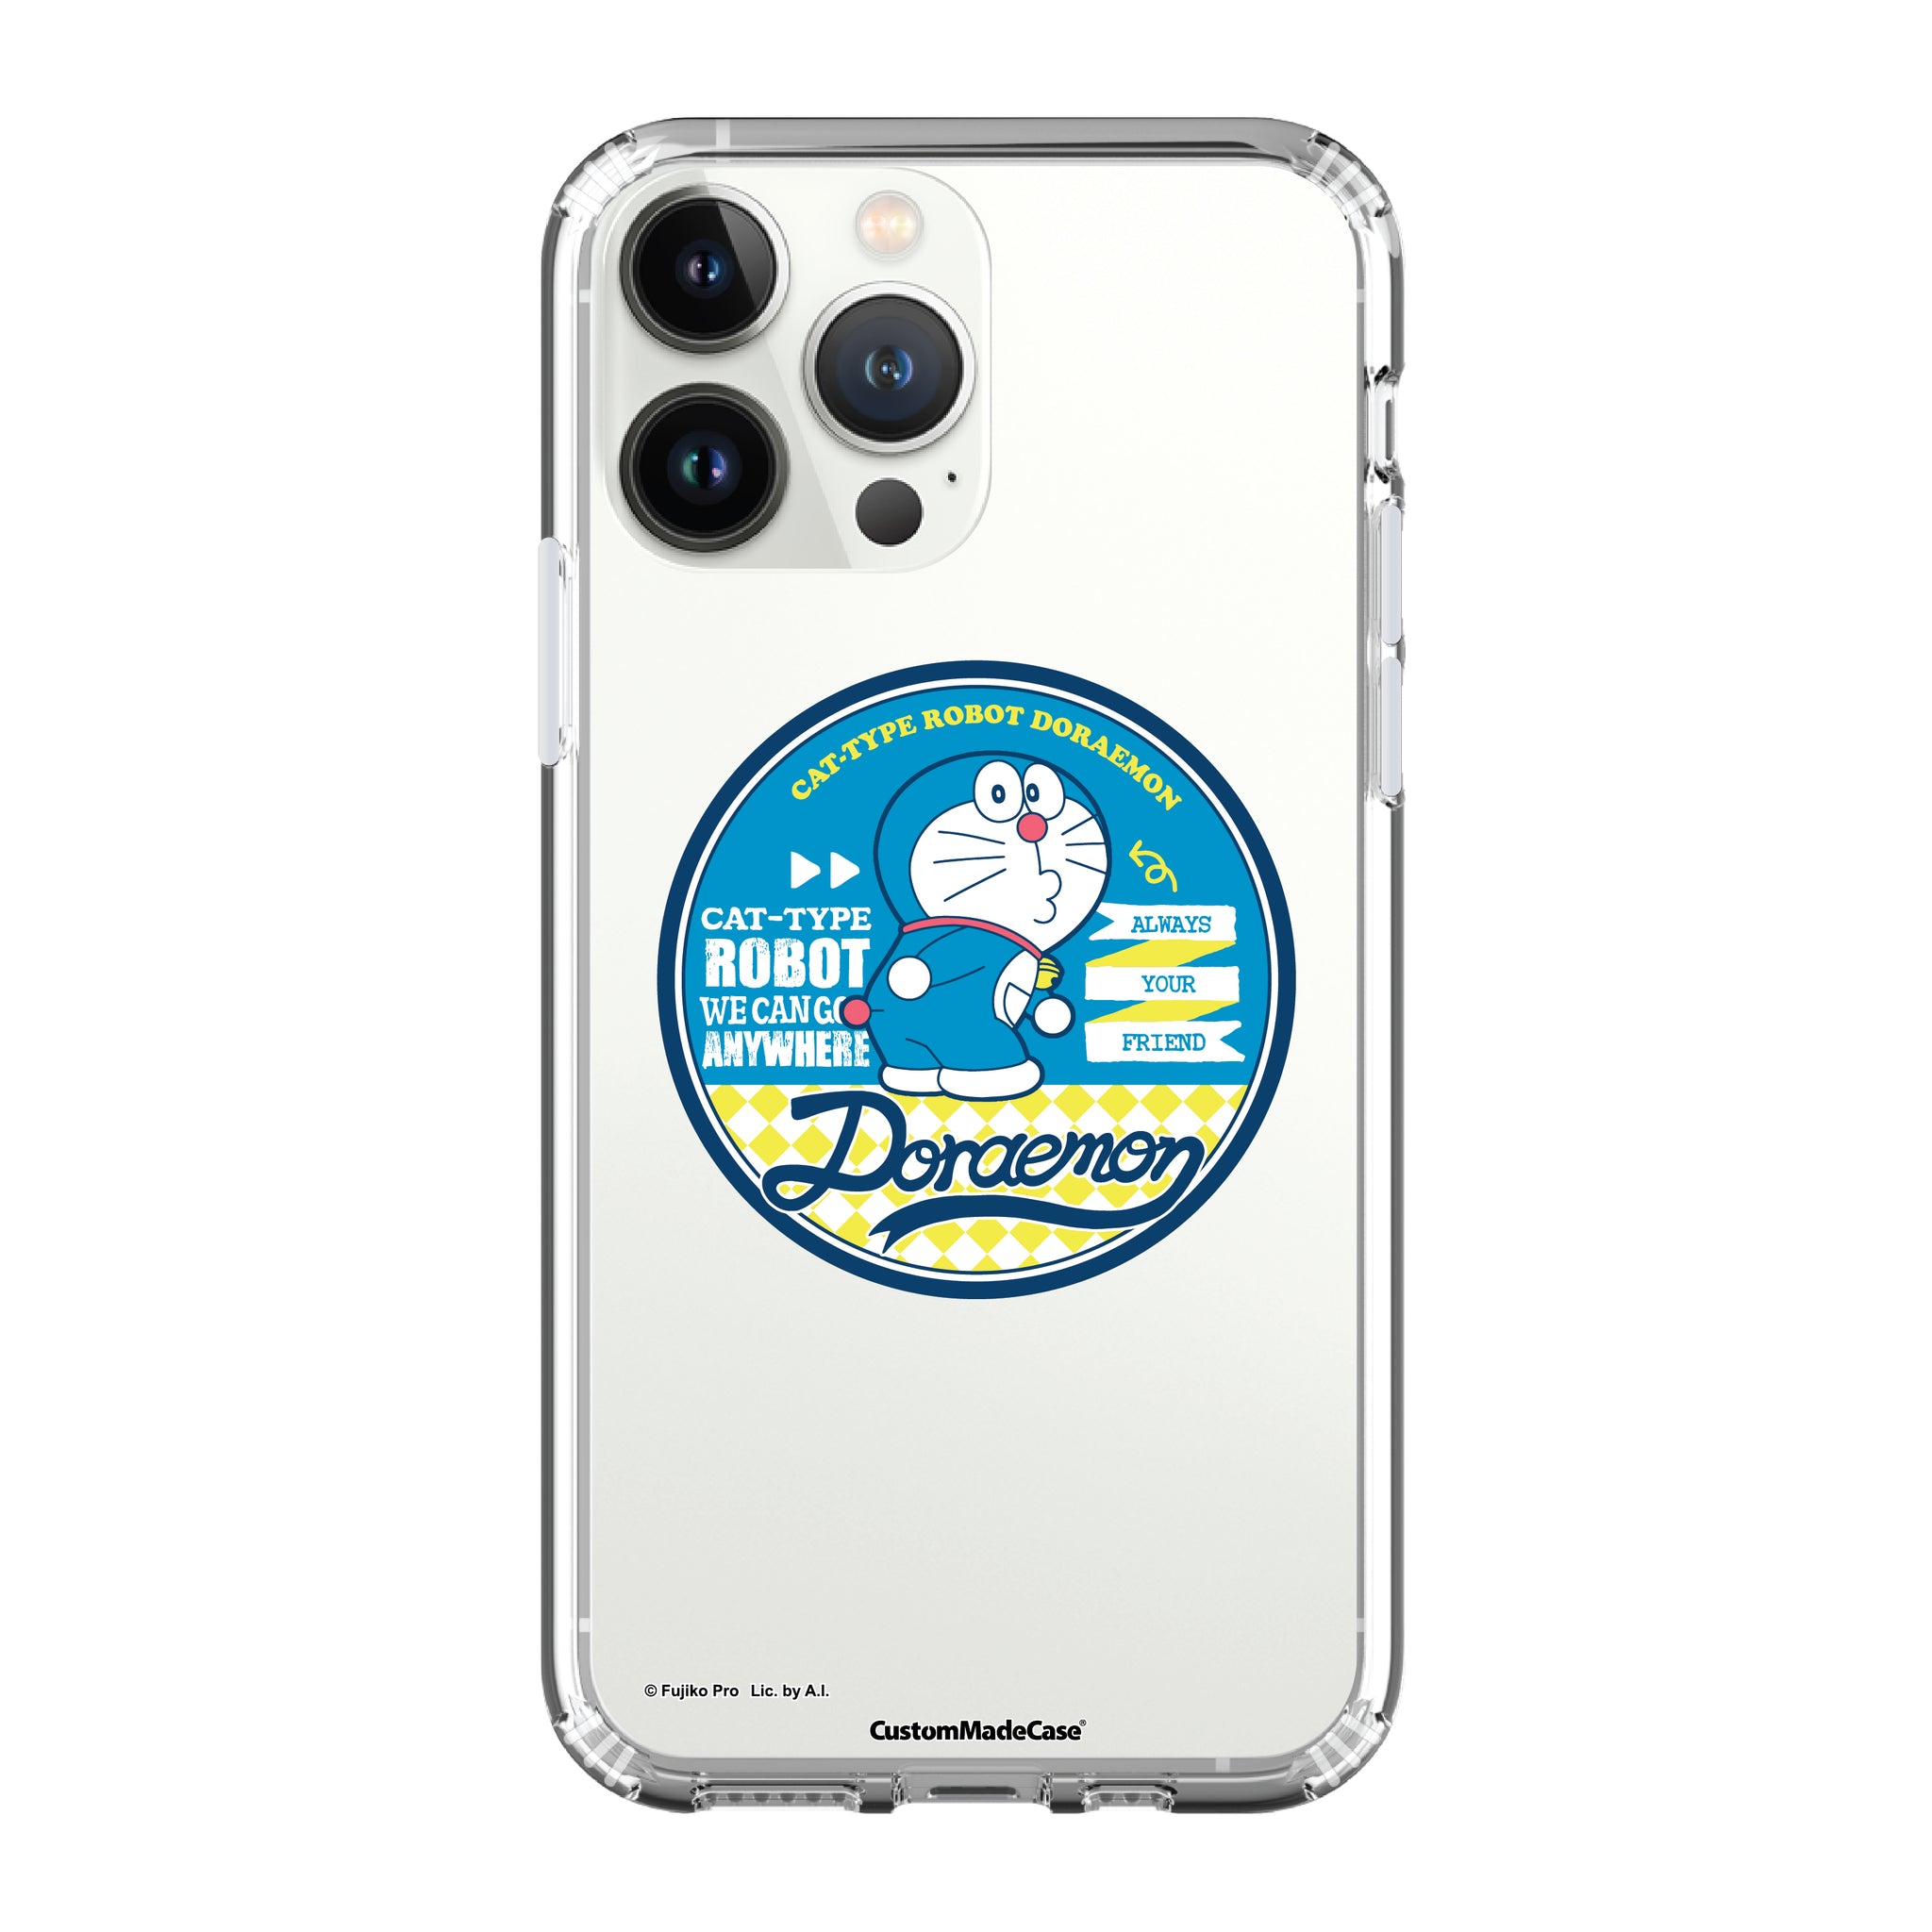 Doraemon Clear Case / iPhone Case / Android Case / Samsung Case 多啦A夢 正版授權 全包邊氣囊防撞手機殼  (DO112)